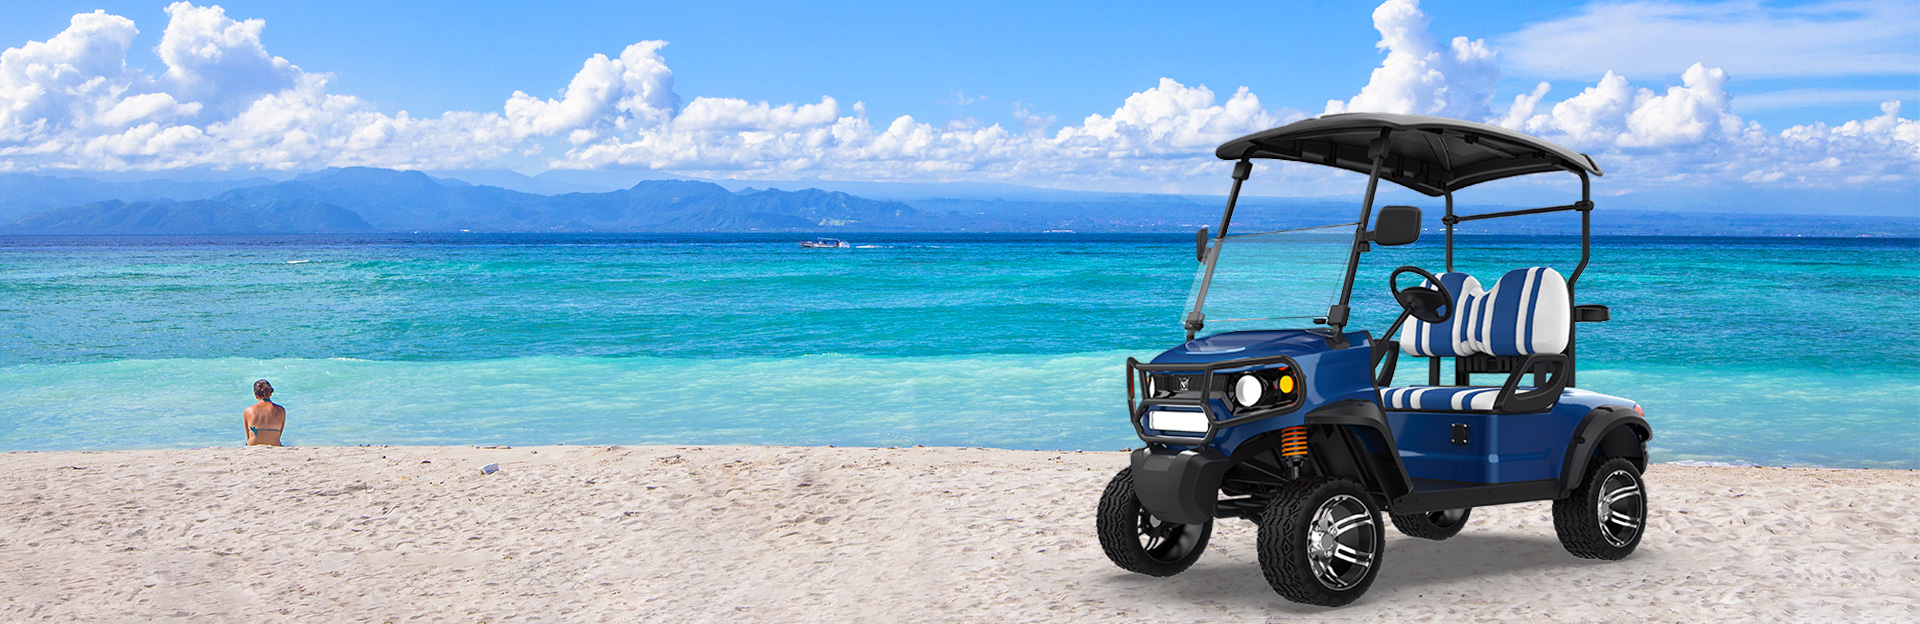 Kinghike Golf Cart: Redefining Luxury and Performance on the Green